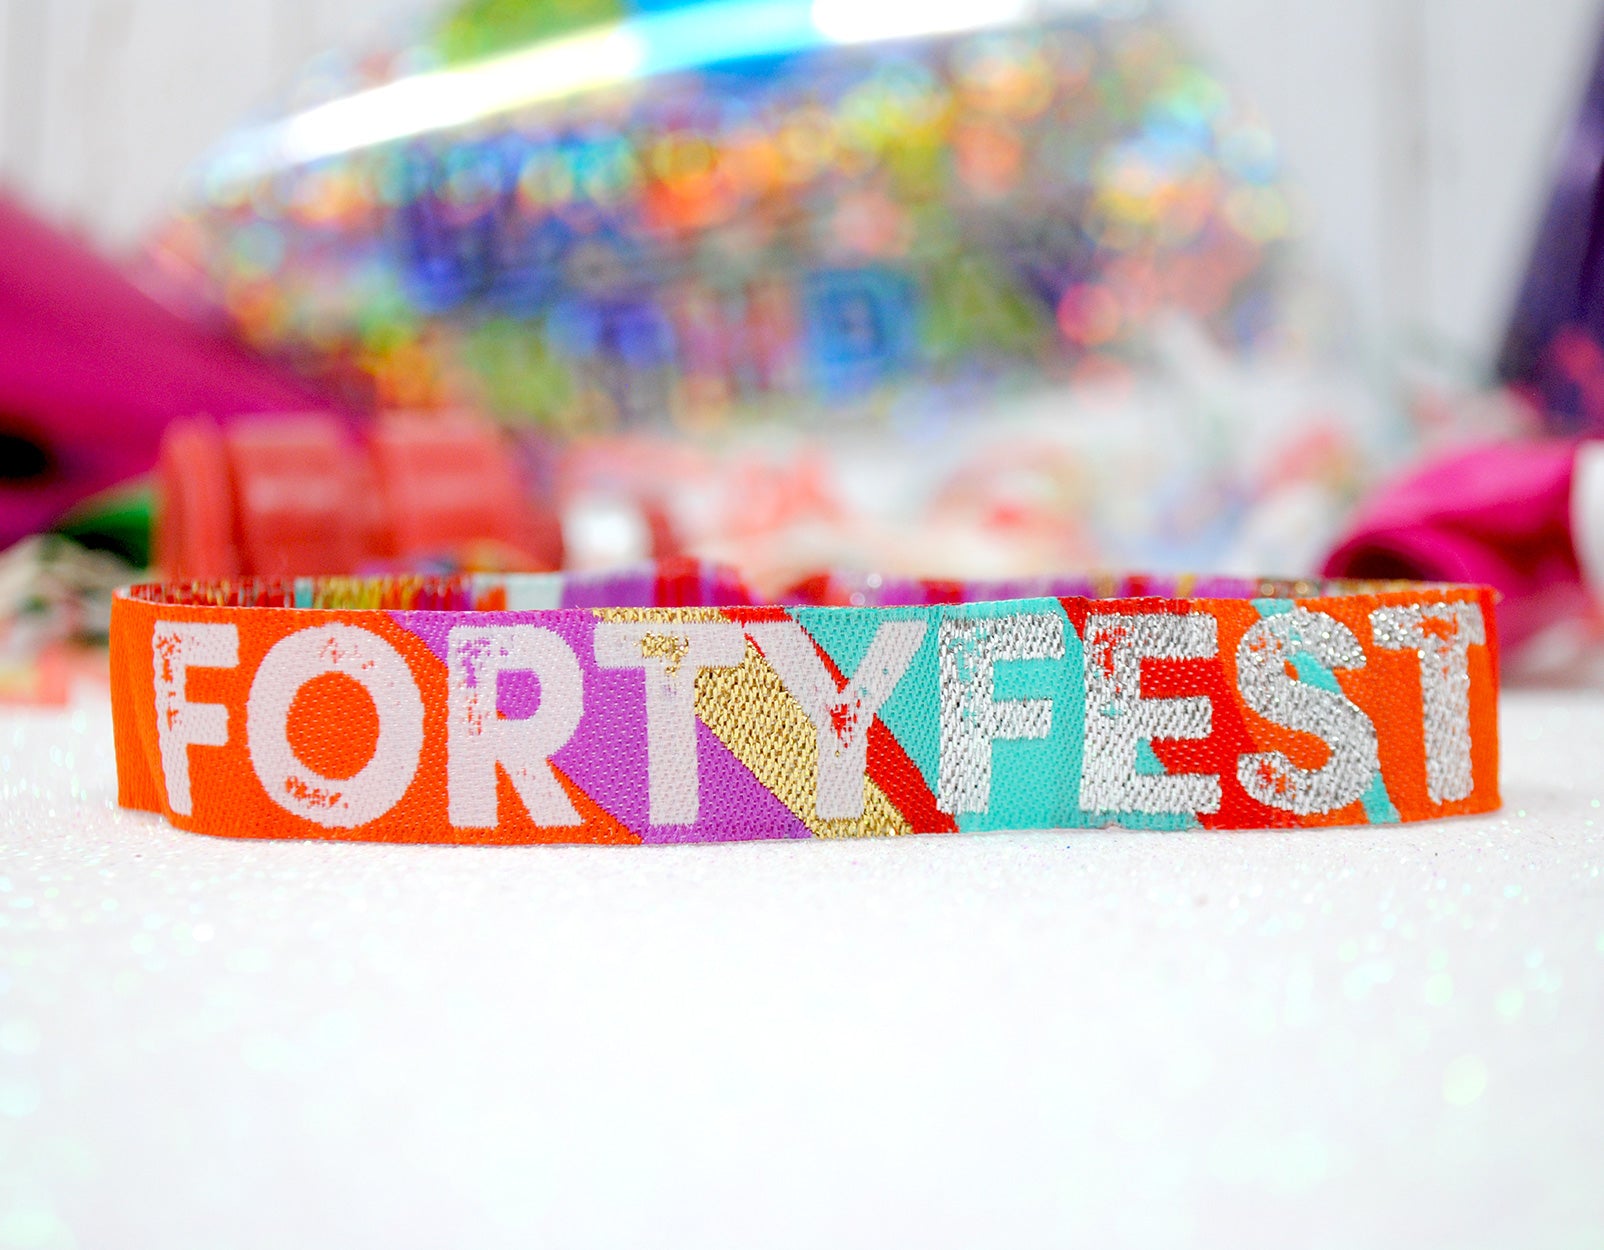 40fest forty fest 40th birthday party festival wristbands